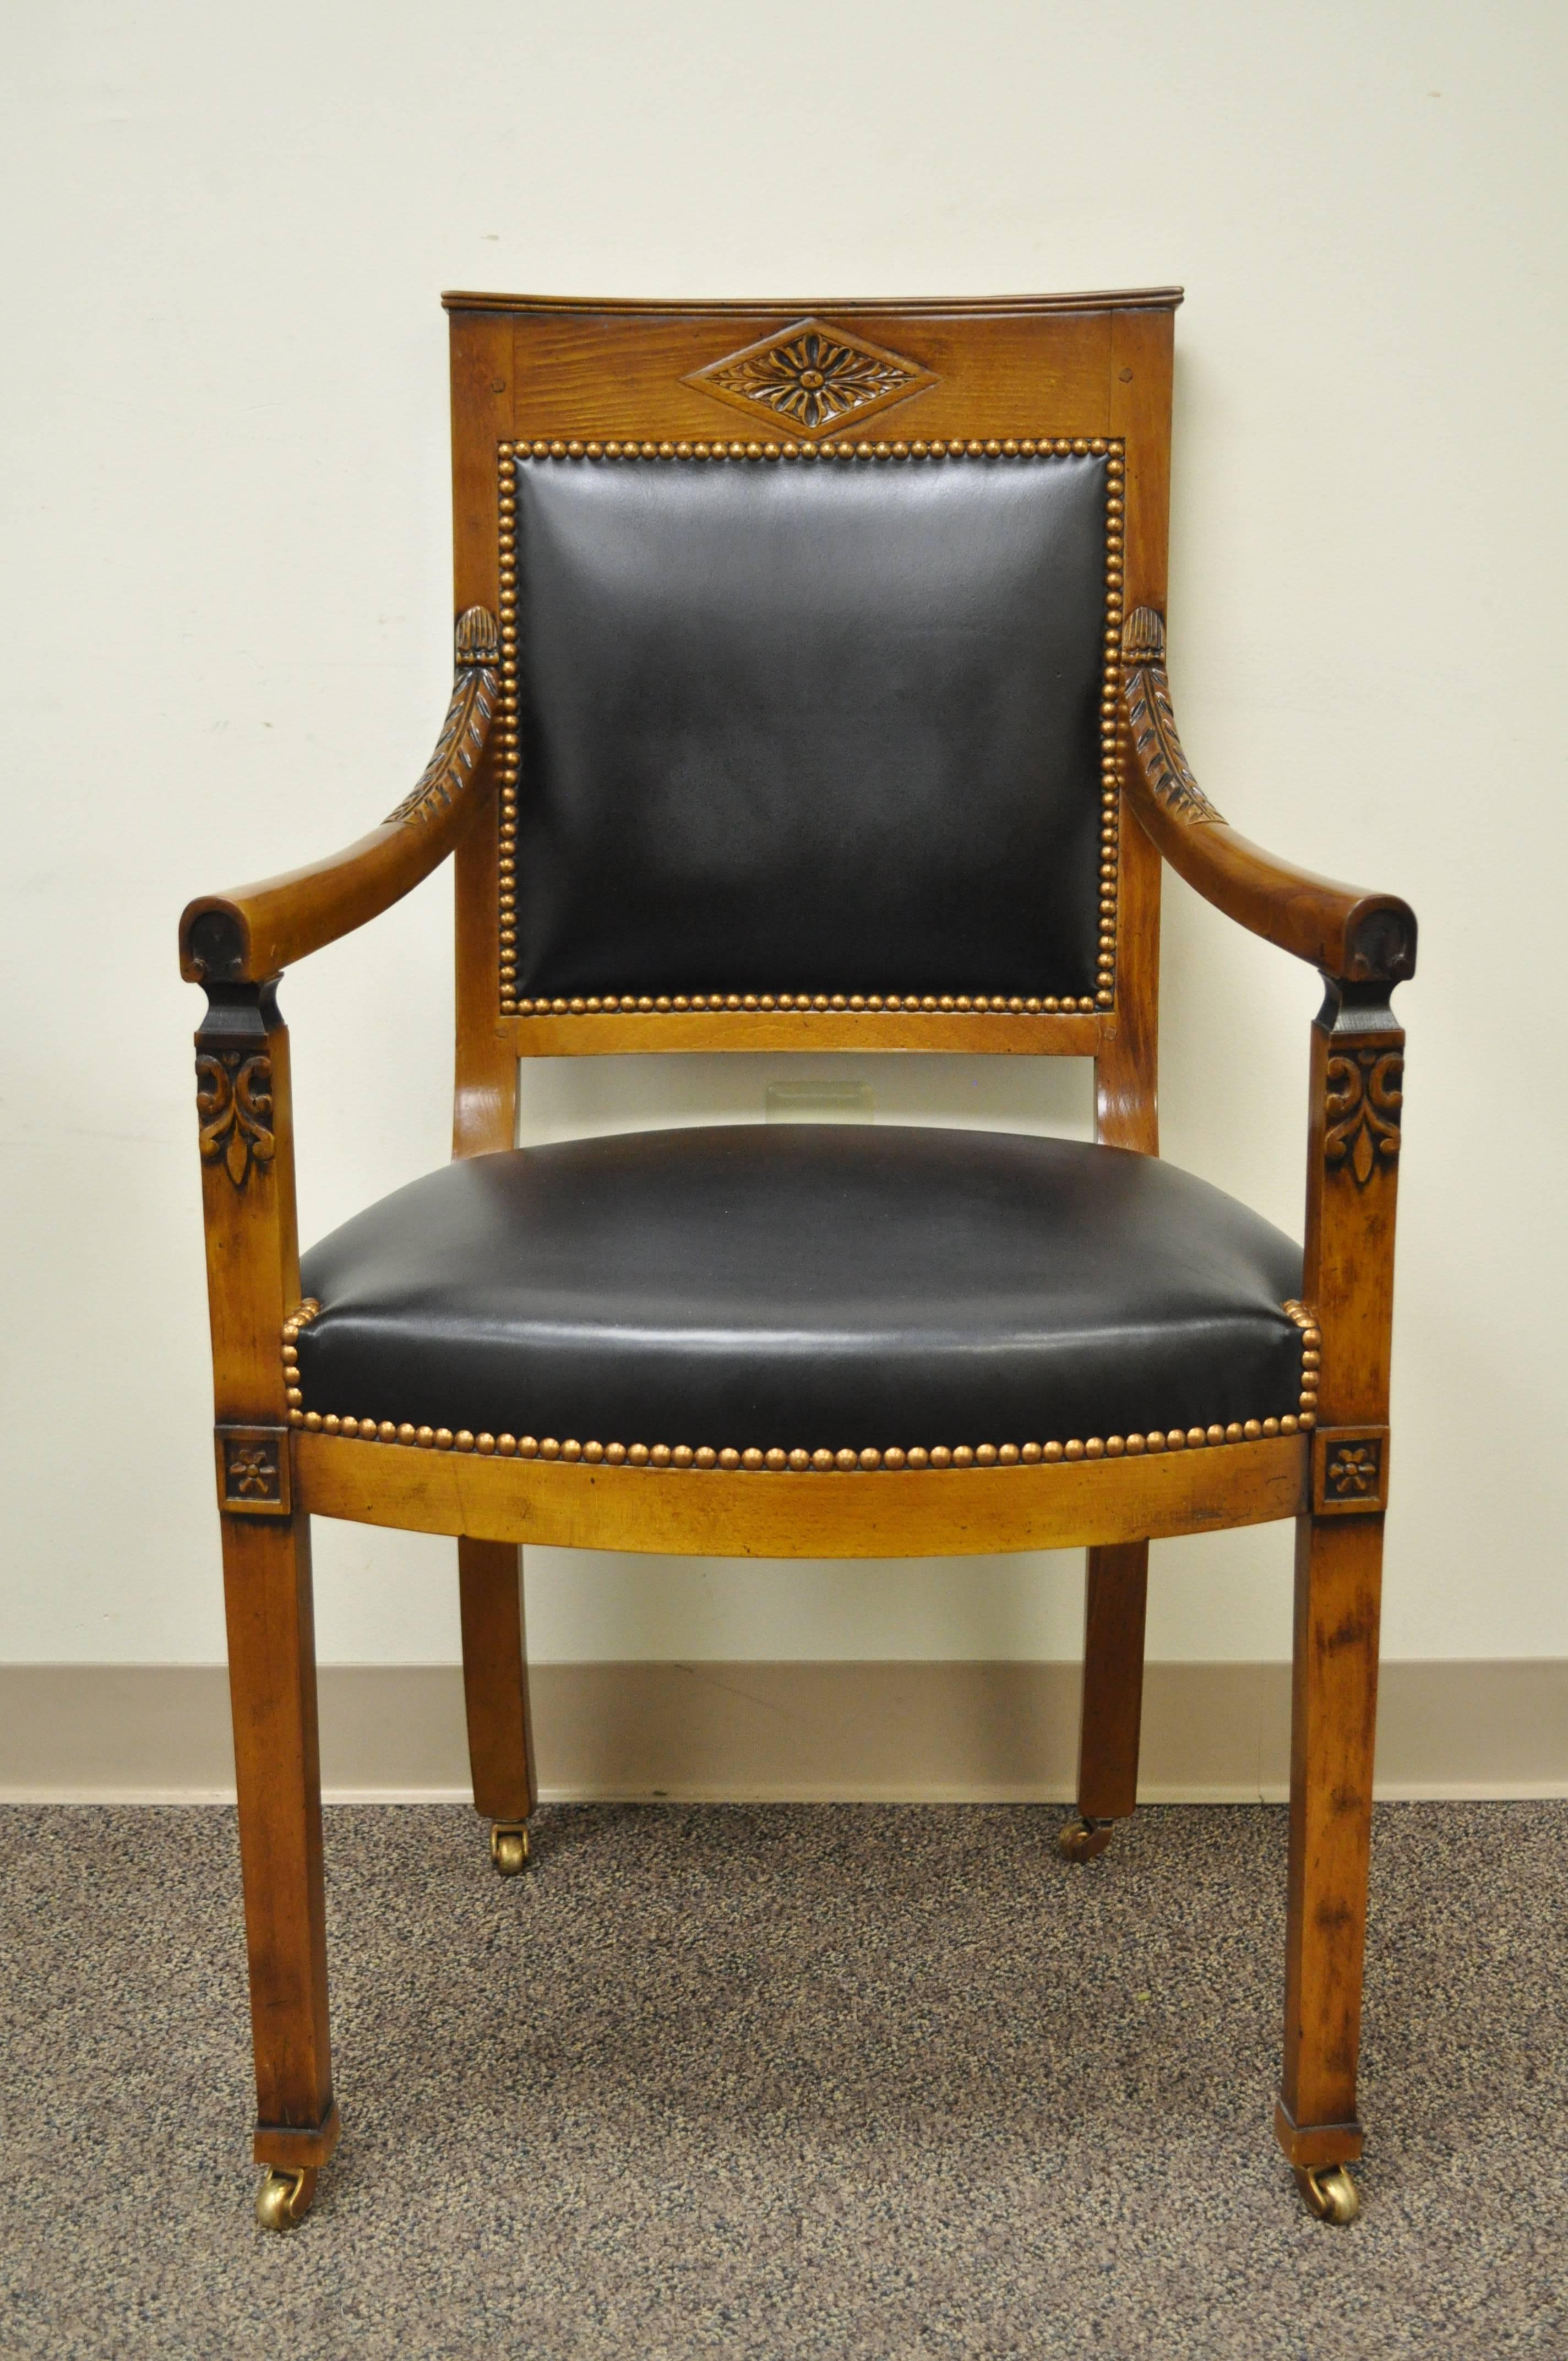 Custom quality solid hand-carved Cherry Fauteuil on brass rolling casters. Armchair features a lightly carved solid cherry frame, black leather upholstery, nailhead trim, and brass rolling casters. The cherry wood is finished with a desirable and